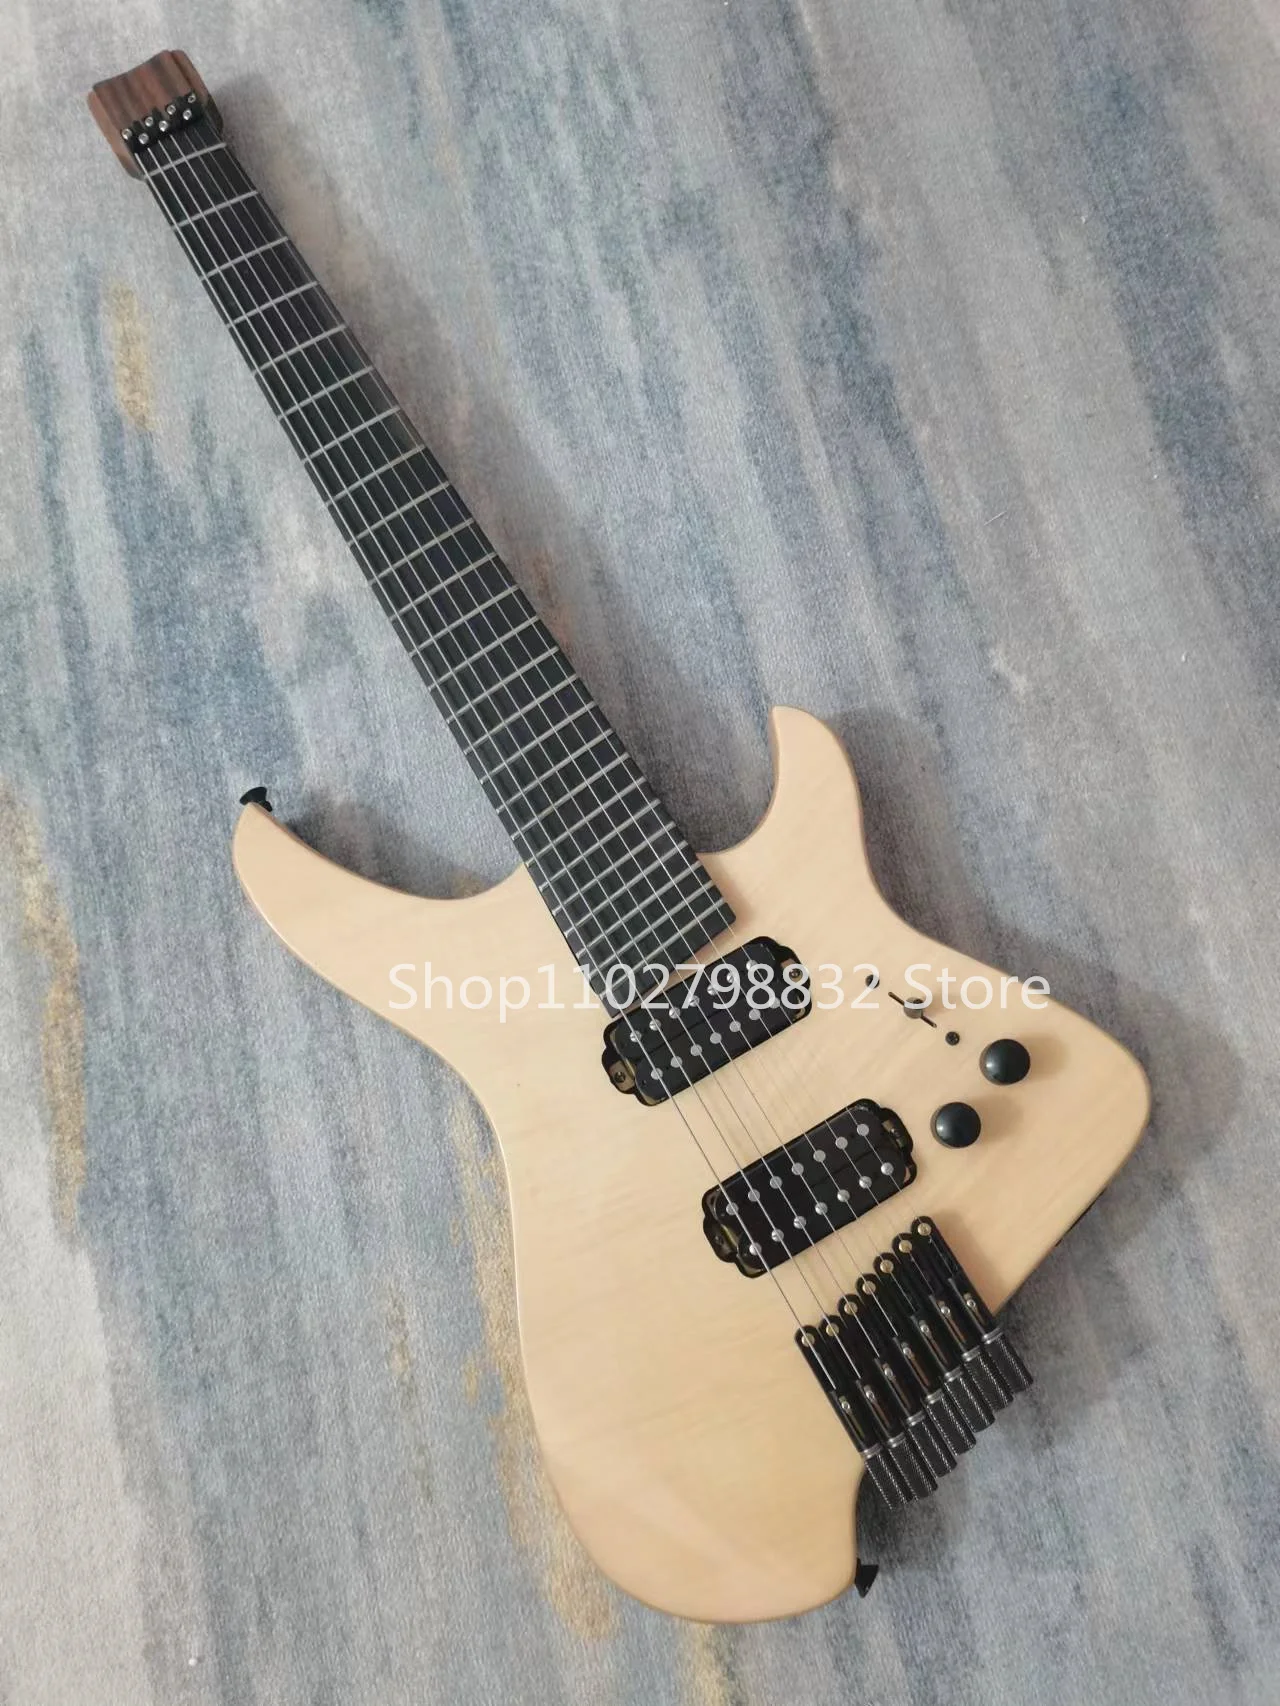 

Headless Electric Guitar with Ebony Fingerboard, 7 Strings, Walnut Neck, Tiger Maple Surface, Black Accessories, Free Shipping